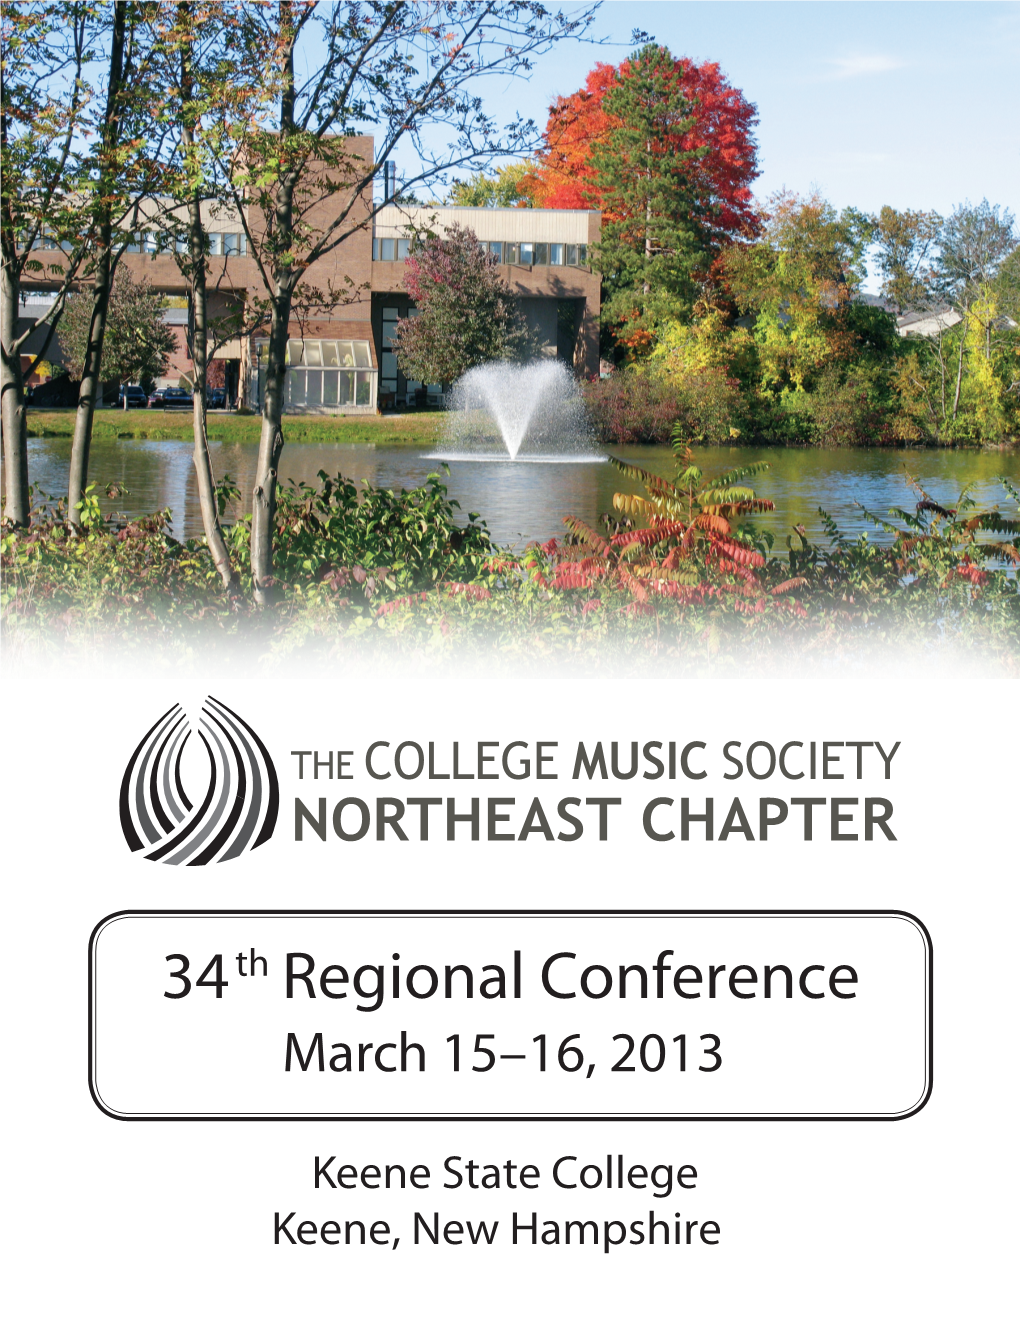 34Th Regional Conference of the College Music Society’S Northeast Chapter, Hosted by the Keene State College Music Department